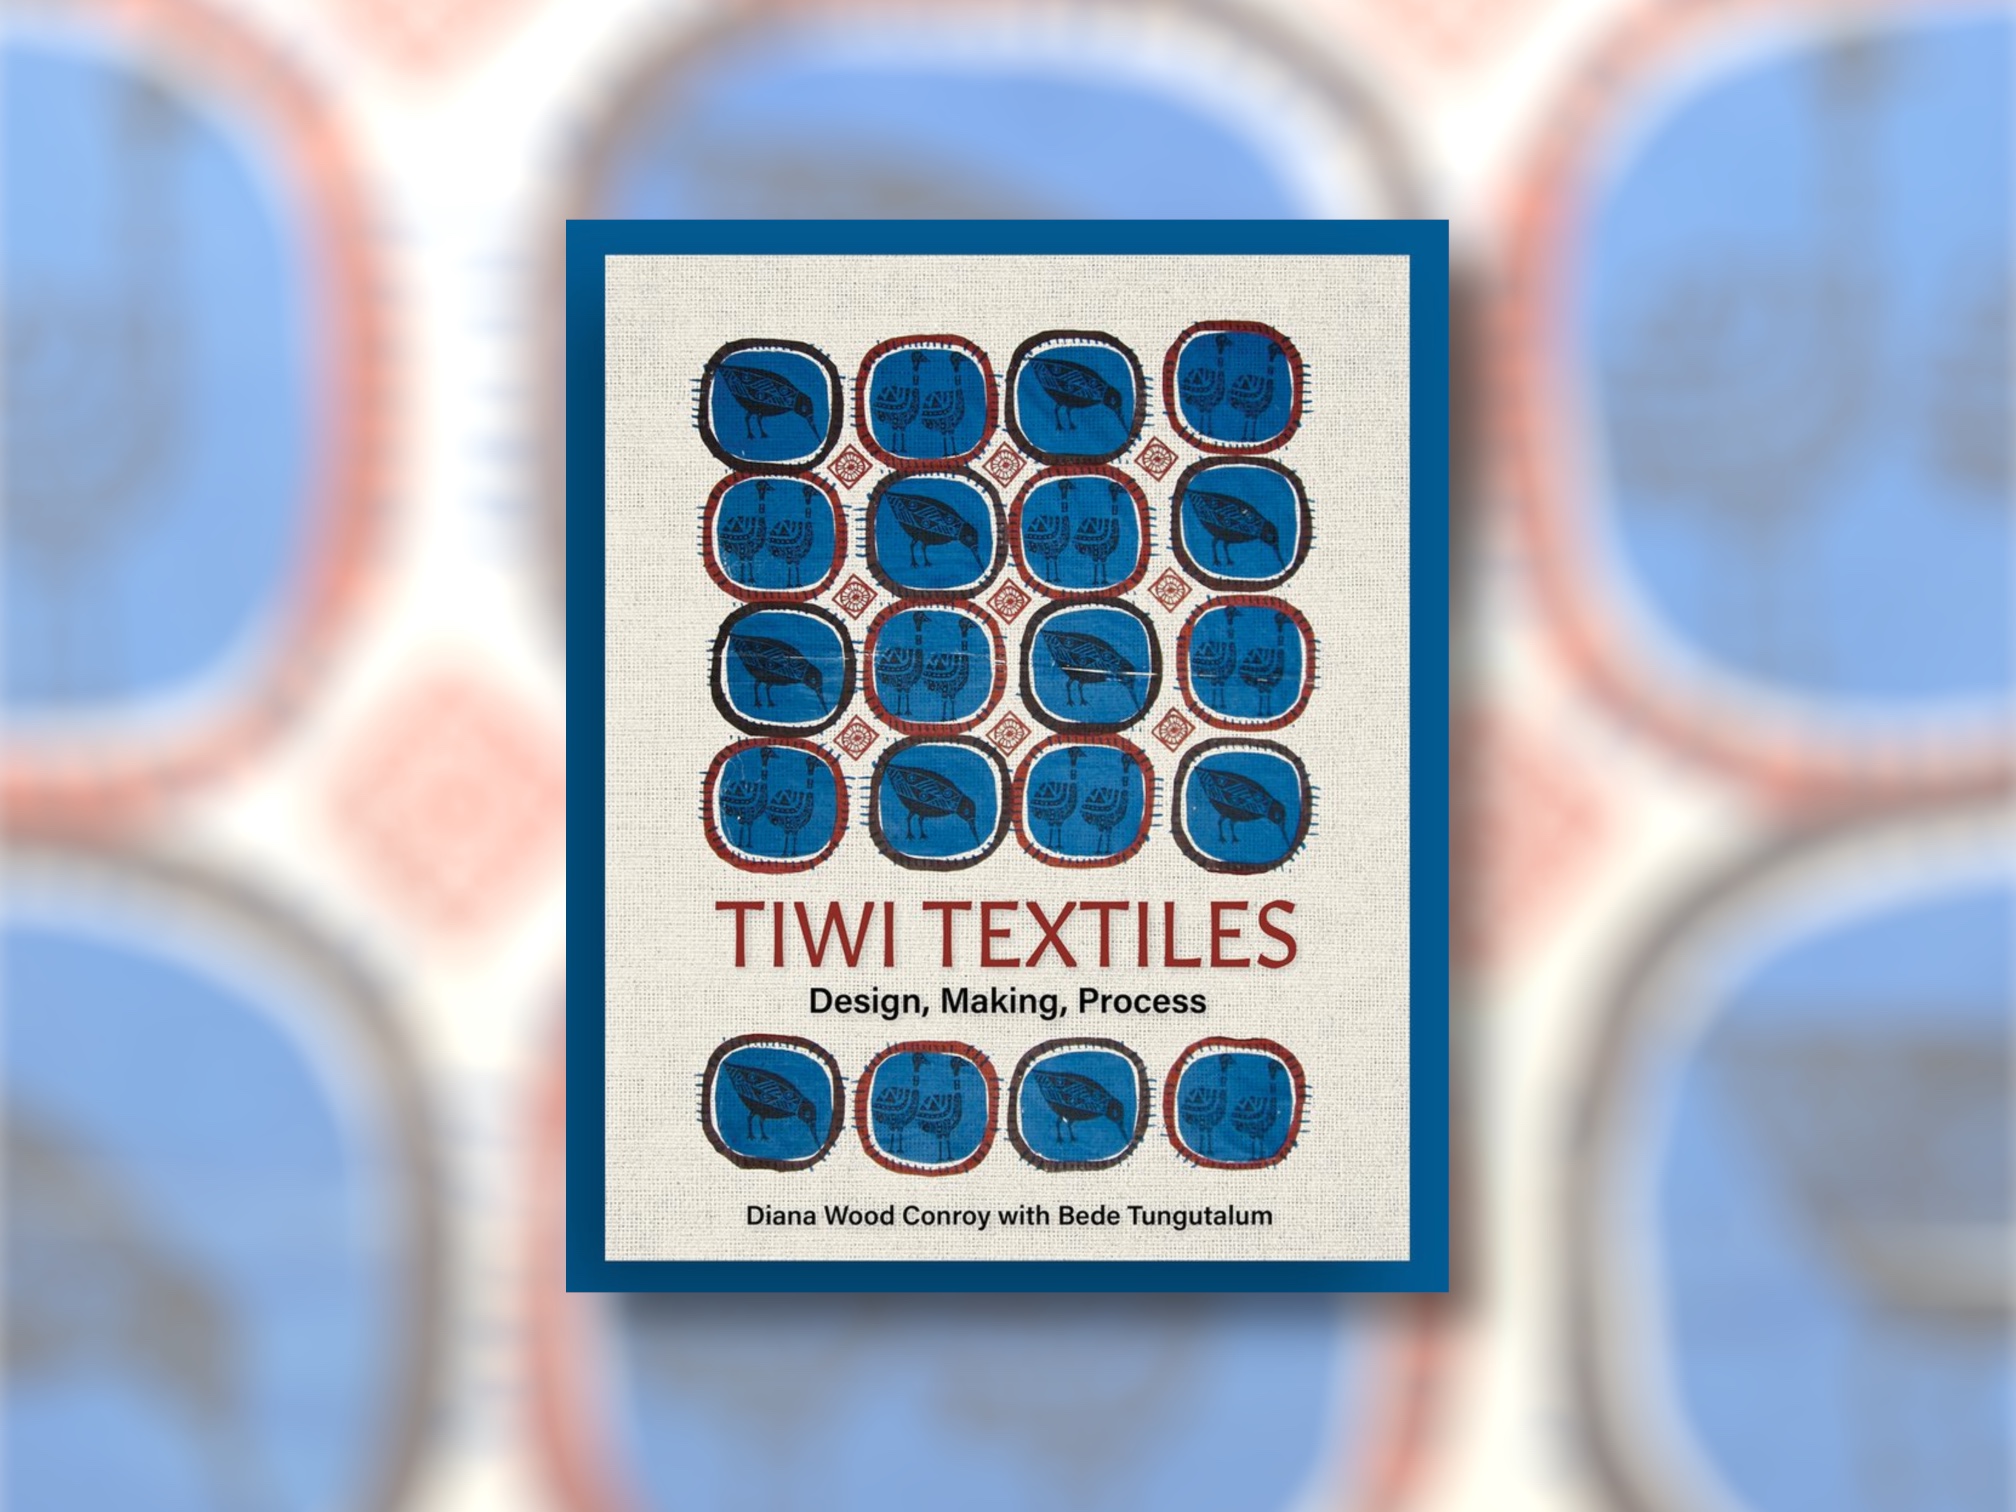 Tiwi Textiles book cover on blurred screen printed fabric background.